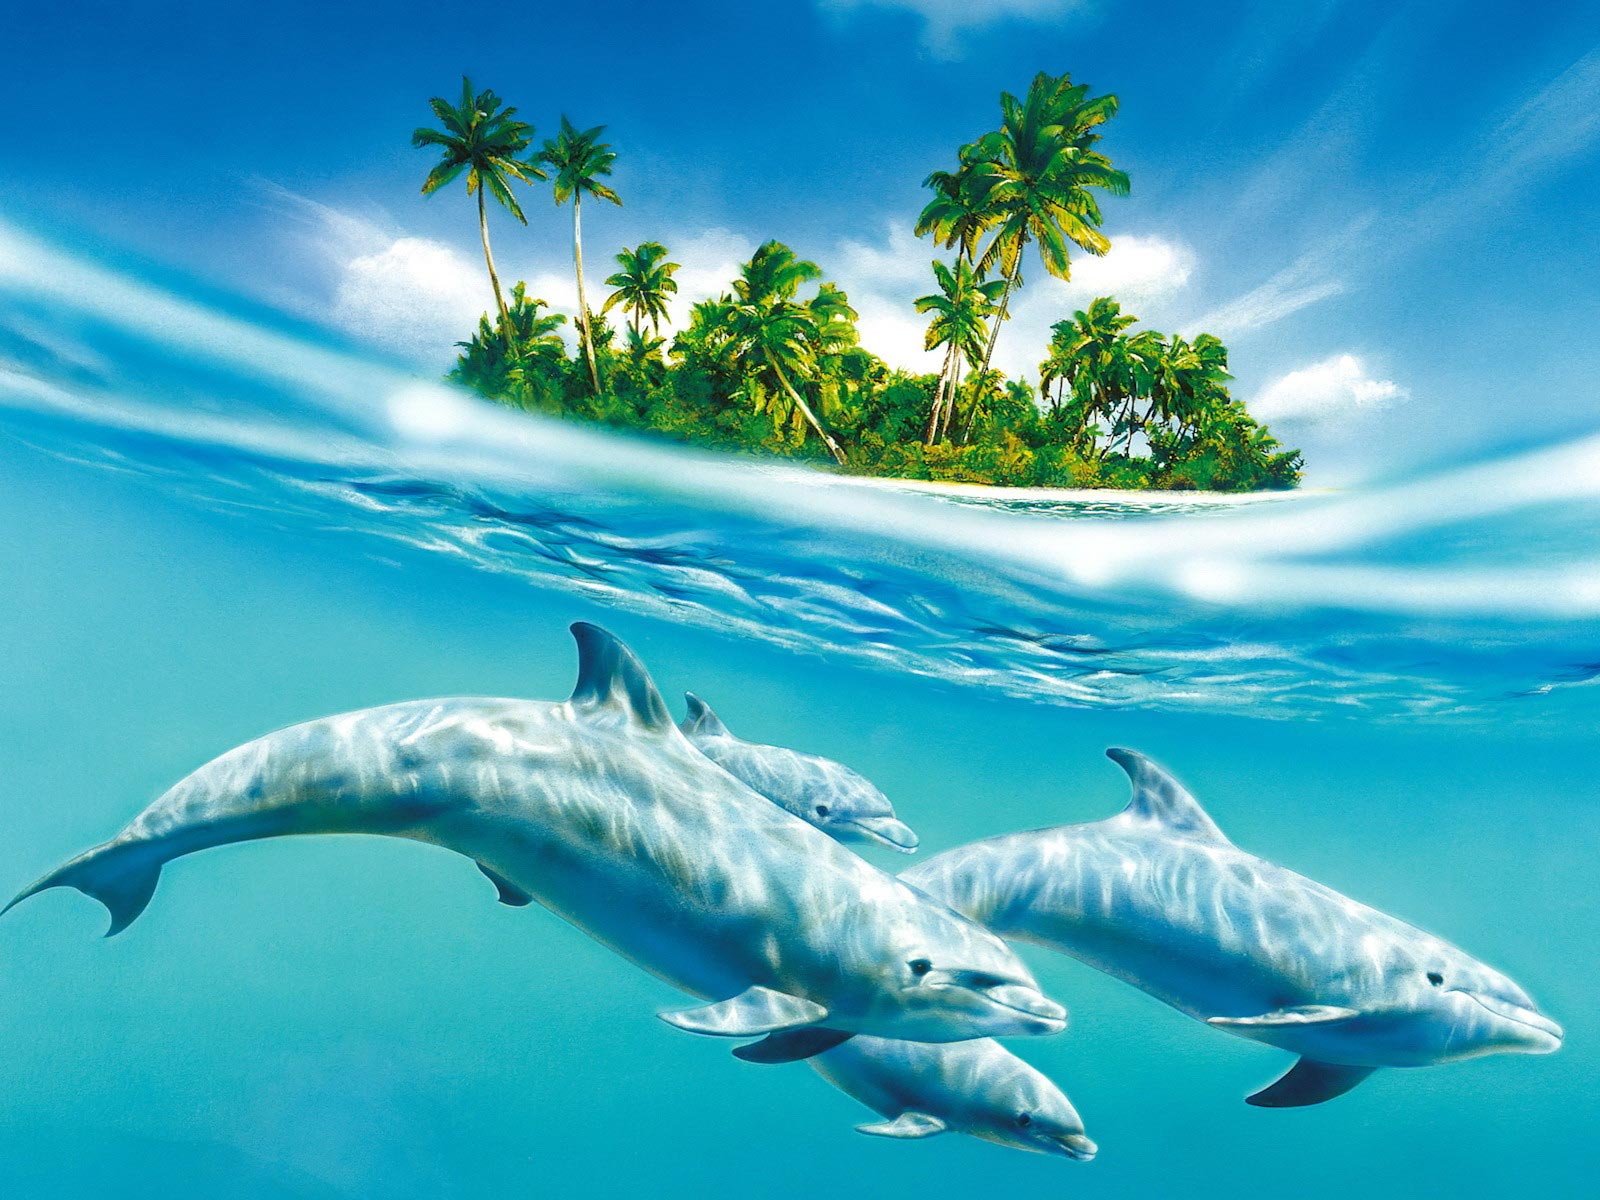 Get HD Blue Dolphins Wallpaper And Make This